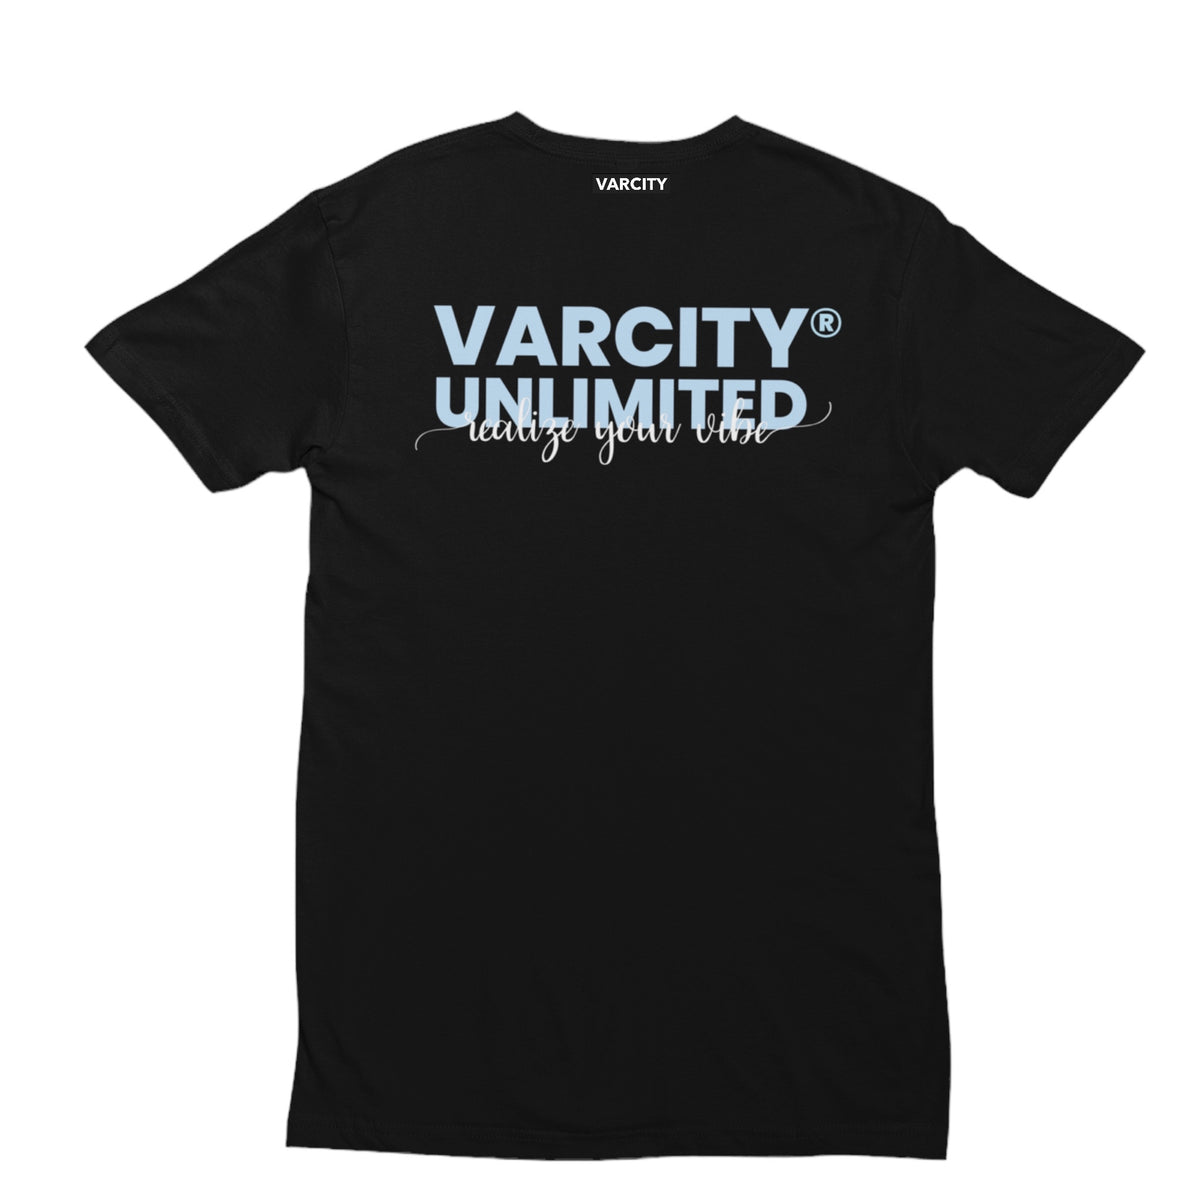 Varcity ® Unlimited Realize Your Vibe T Shirt Black